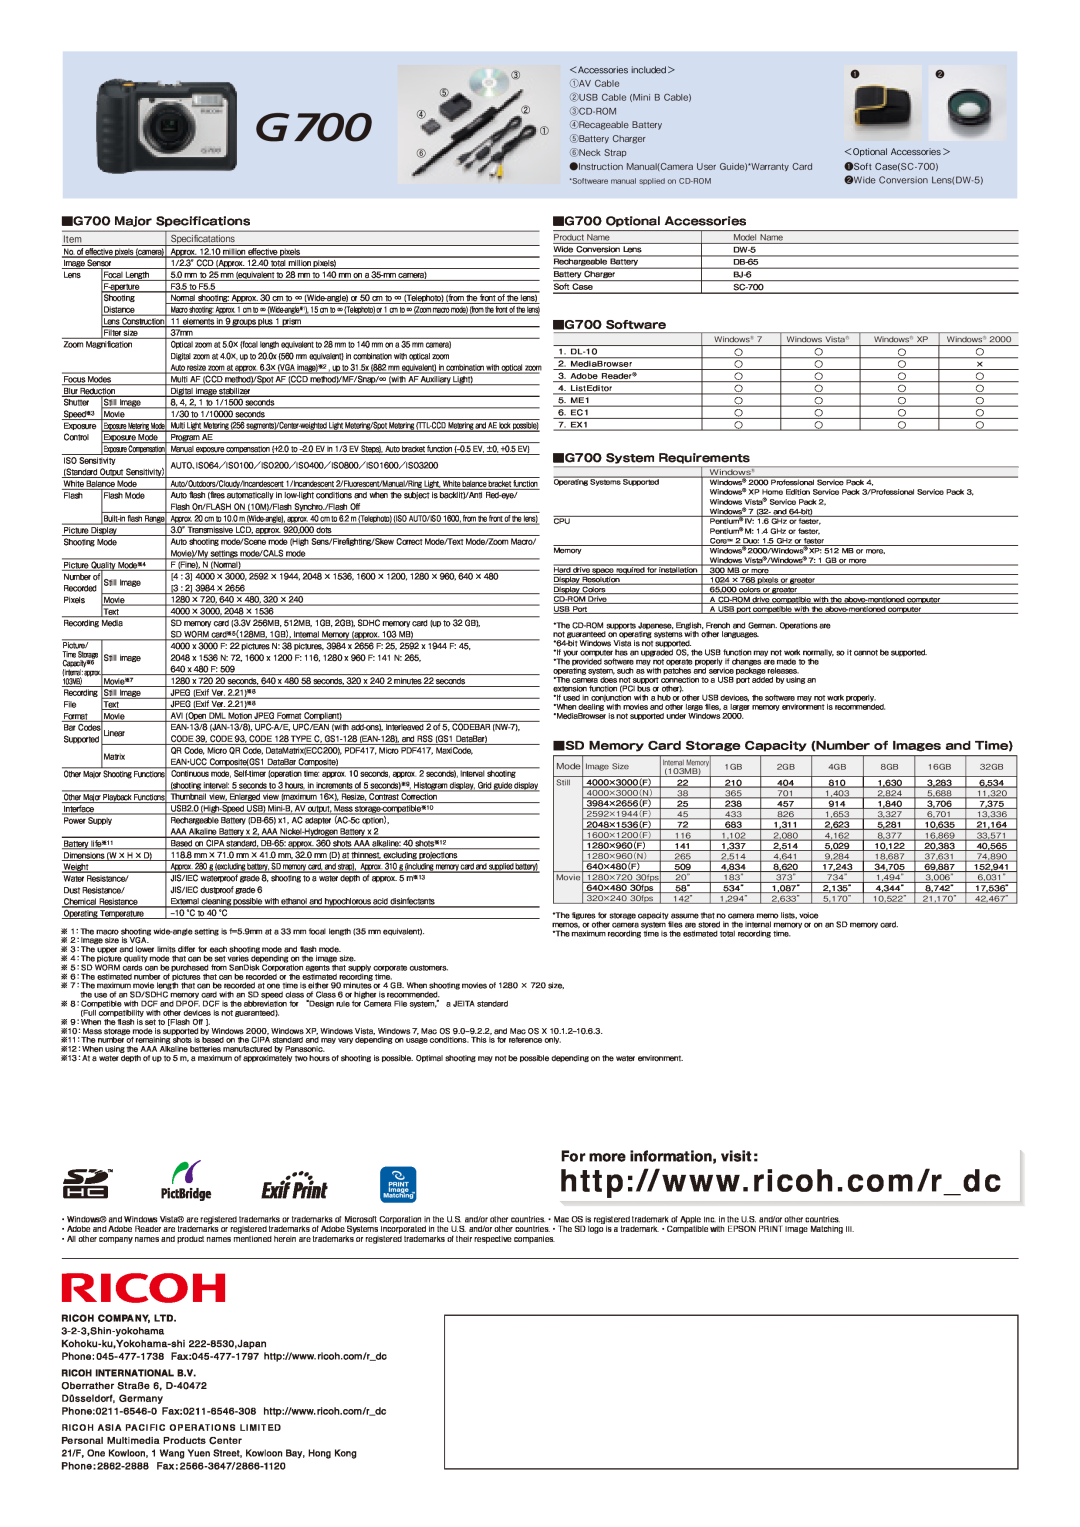 Ricoh manual G700 Major Speciﬁcations, G700 Optional Accessories, G700 Software, G700 System Requirements 